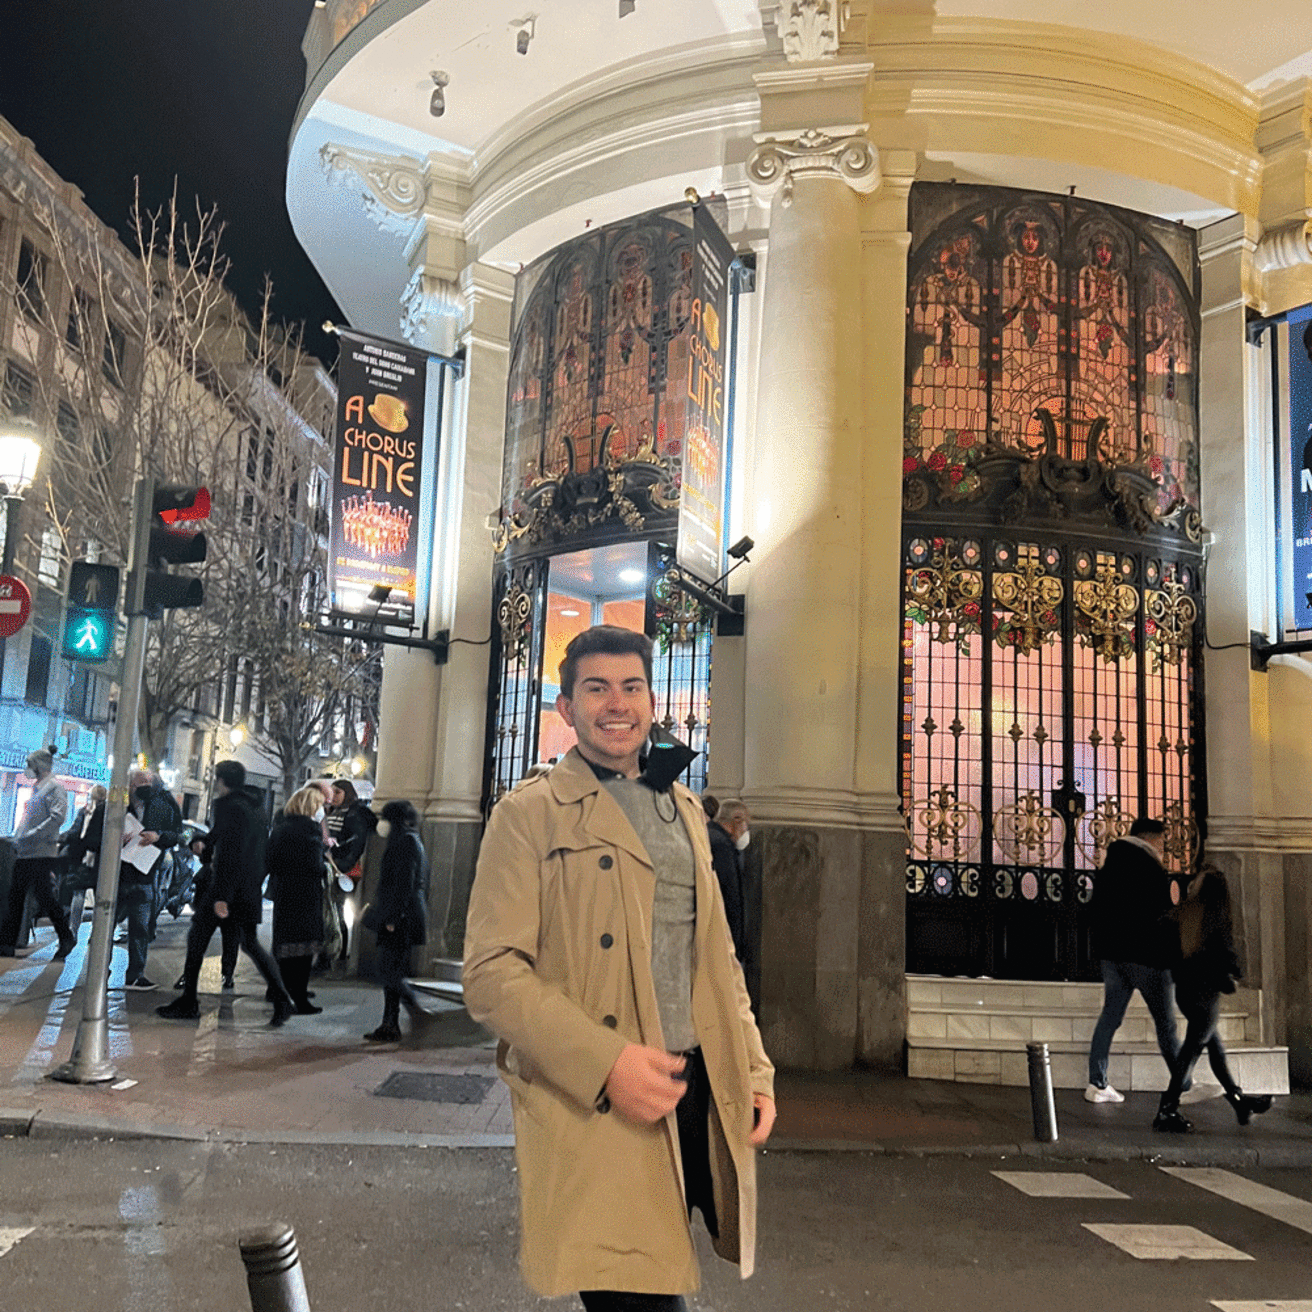 Kevin Drahos outside a theatre in Madrid